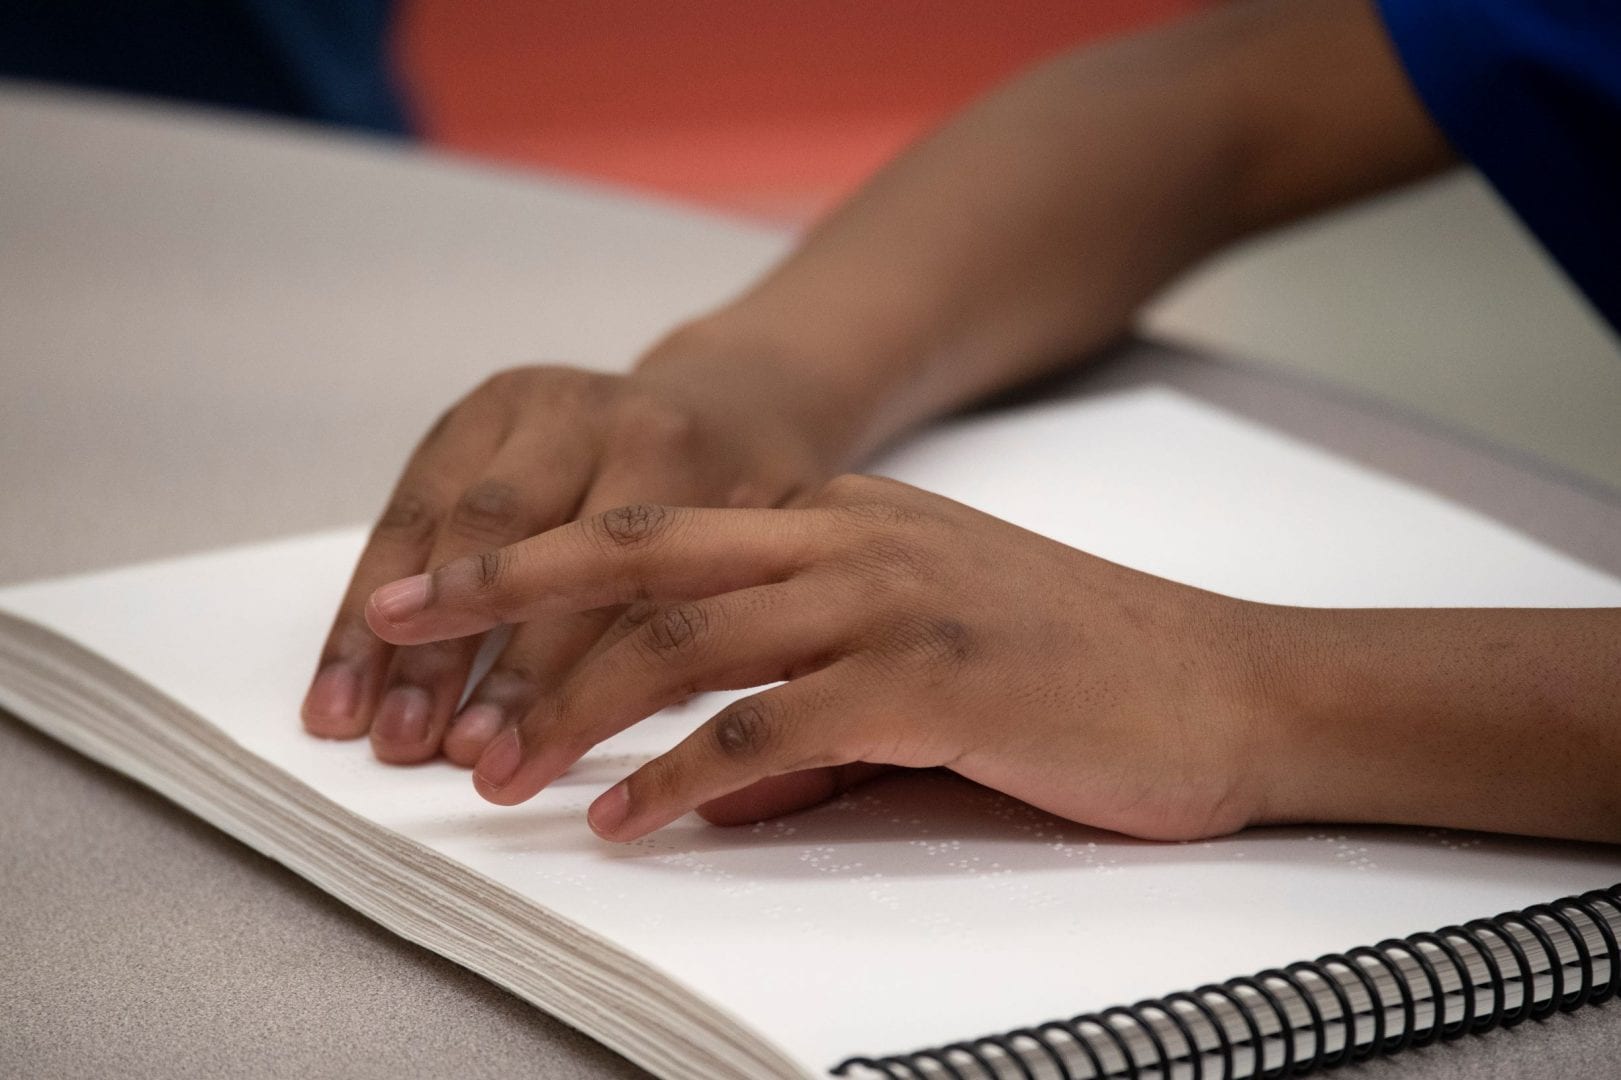 A close up of the hands of someone reading spiral bound braille